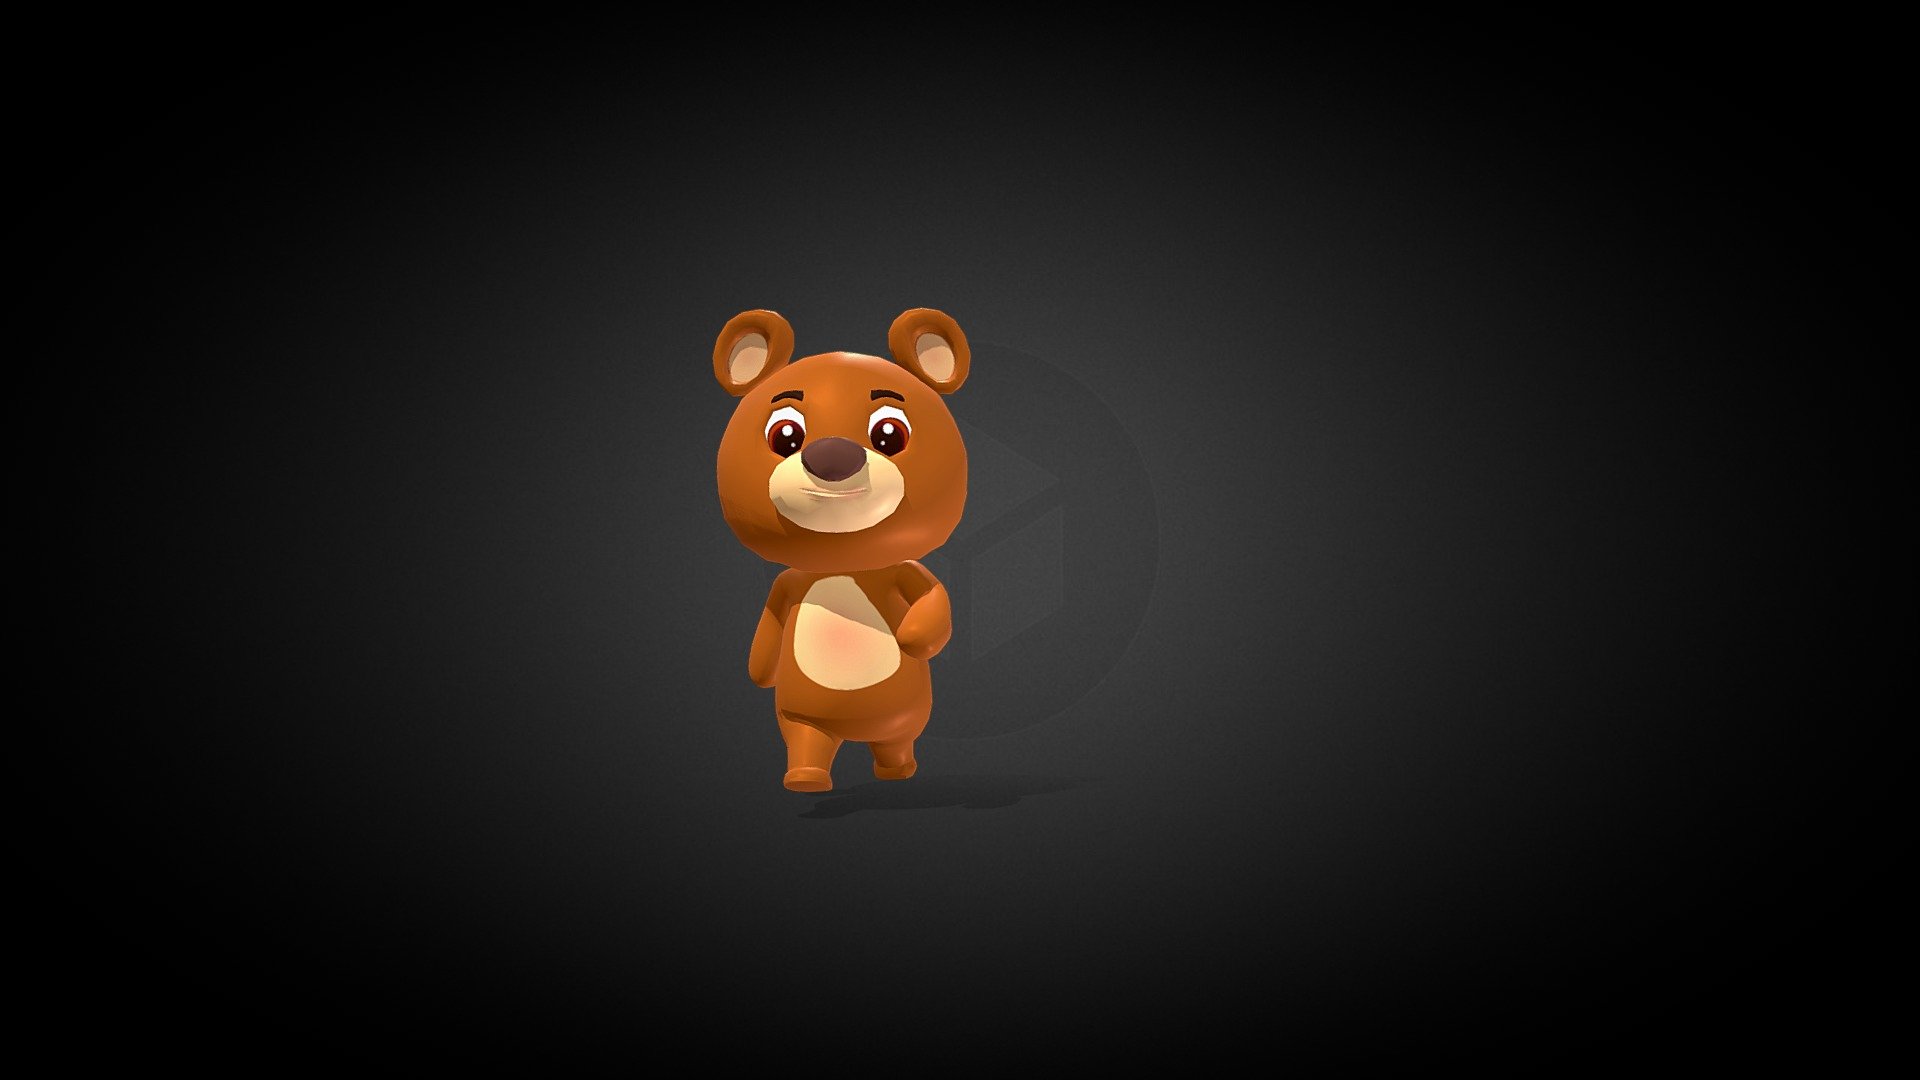 3D Cartoon Bear:

A low-poly Cartoon Bear with hand painted high quality texture.This Assets use AR,VR,mobile Game,pc game and any different projects.

All assets are created in a low poly art style. The material setups are simple and you are able to customize them easily.Use unity standard material.

Textures Size:1024x1024

Rig:Fully supports mecanim humanoid animation system.I hope you like this game ready asset.

Humanoid mecanim system rig.

Supports Humanoid Animation. Unity Humanoid compatible Mixamo and other humanoid animation libraries.

Number of textures: 1( Base color Map)

Polygon count of [Cartoon Bear]

Vertis: 3640Tris: 6965Face: 3495

Number of meshes: 1

Rigging: Yes(Humanoid mechanism system rig)

Animation count: : 13

Attack_01,Attack_02,Idle_01,Idle_02,Die_01,Die_02,Walk_Forward,Walk_Backward,Run,Jump,Jump to Run,Talking,StandingUp.
Animation type list: RootMotion &amp; In Place

UV mapping: Yes, Non-Overlapping

All Gaming Engine Supported,Like-Unity.Unriel Engine Ect 3d model